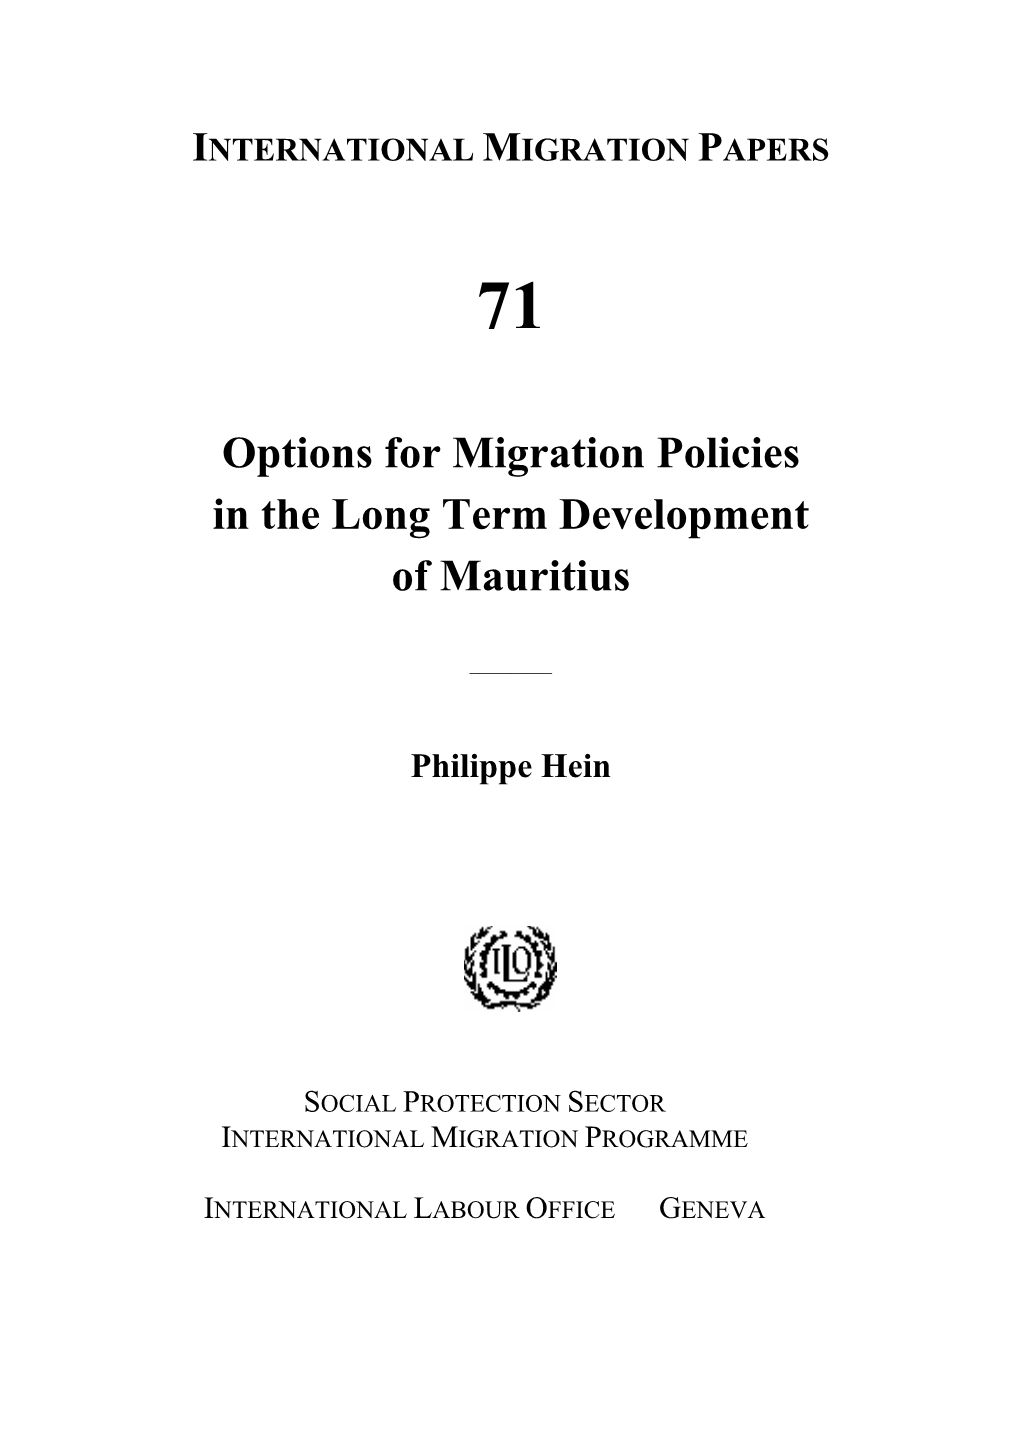 Options for Migration Policies in the Long Term Development of Mauritius